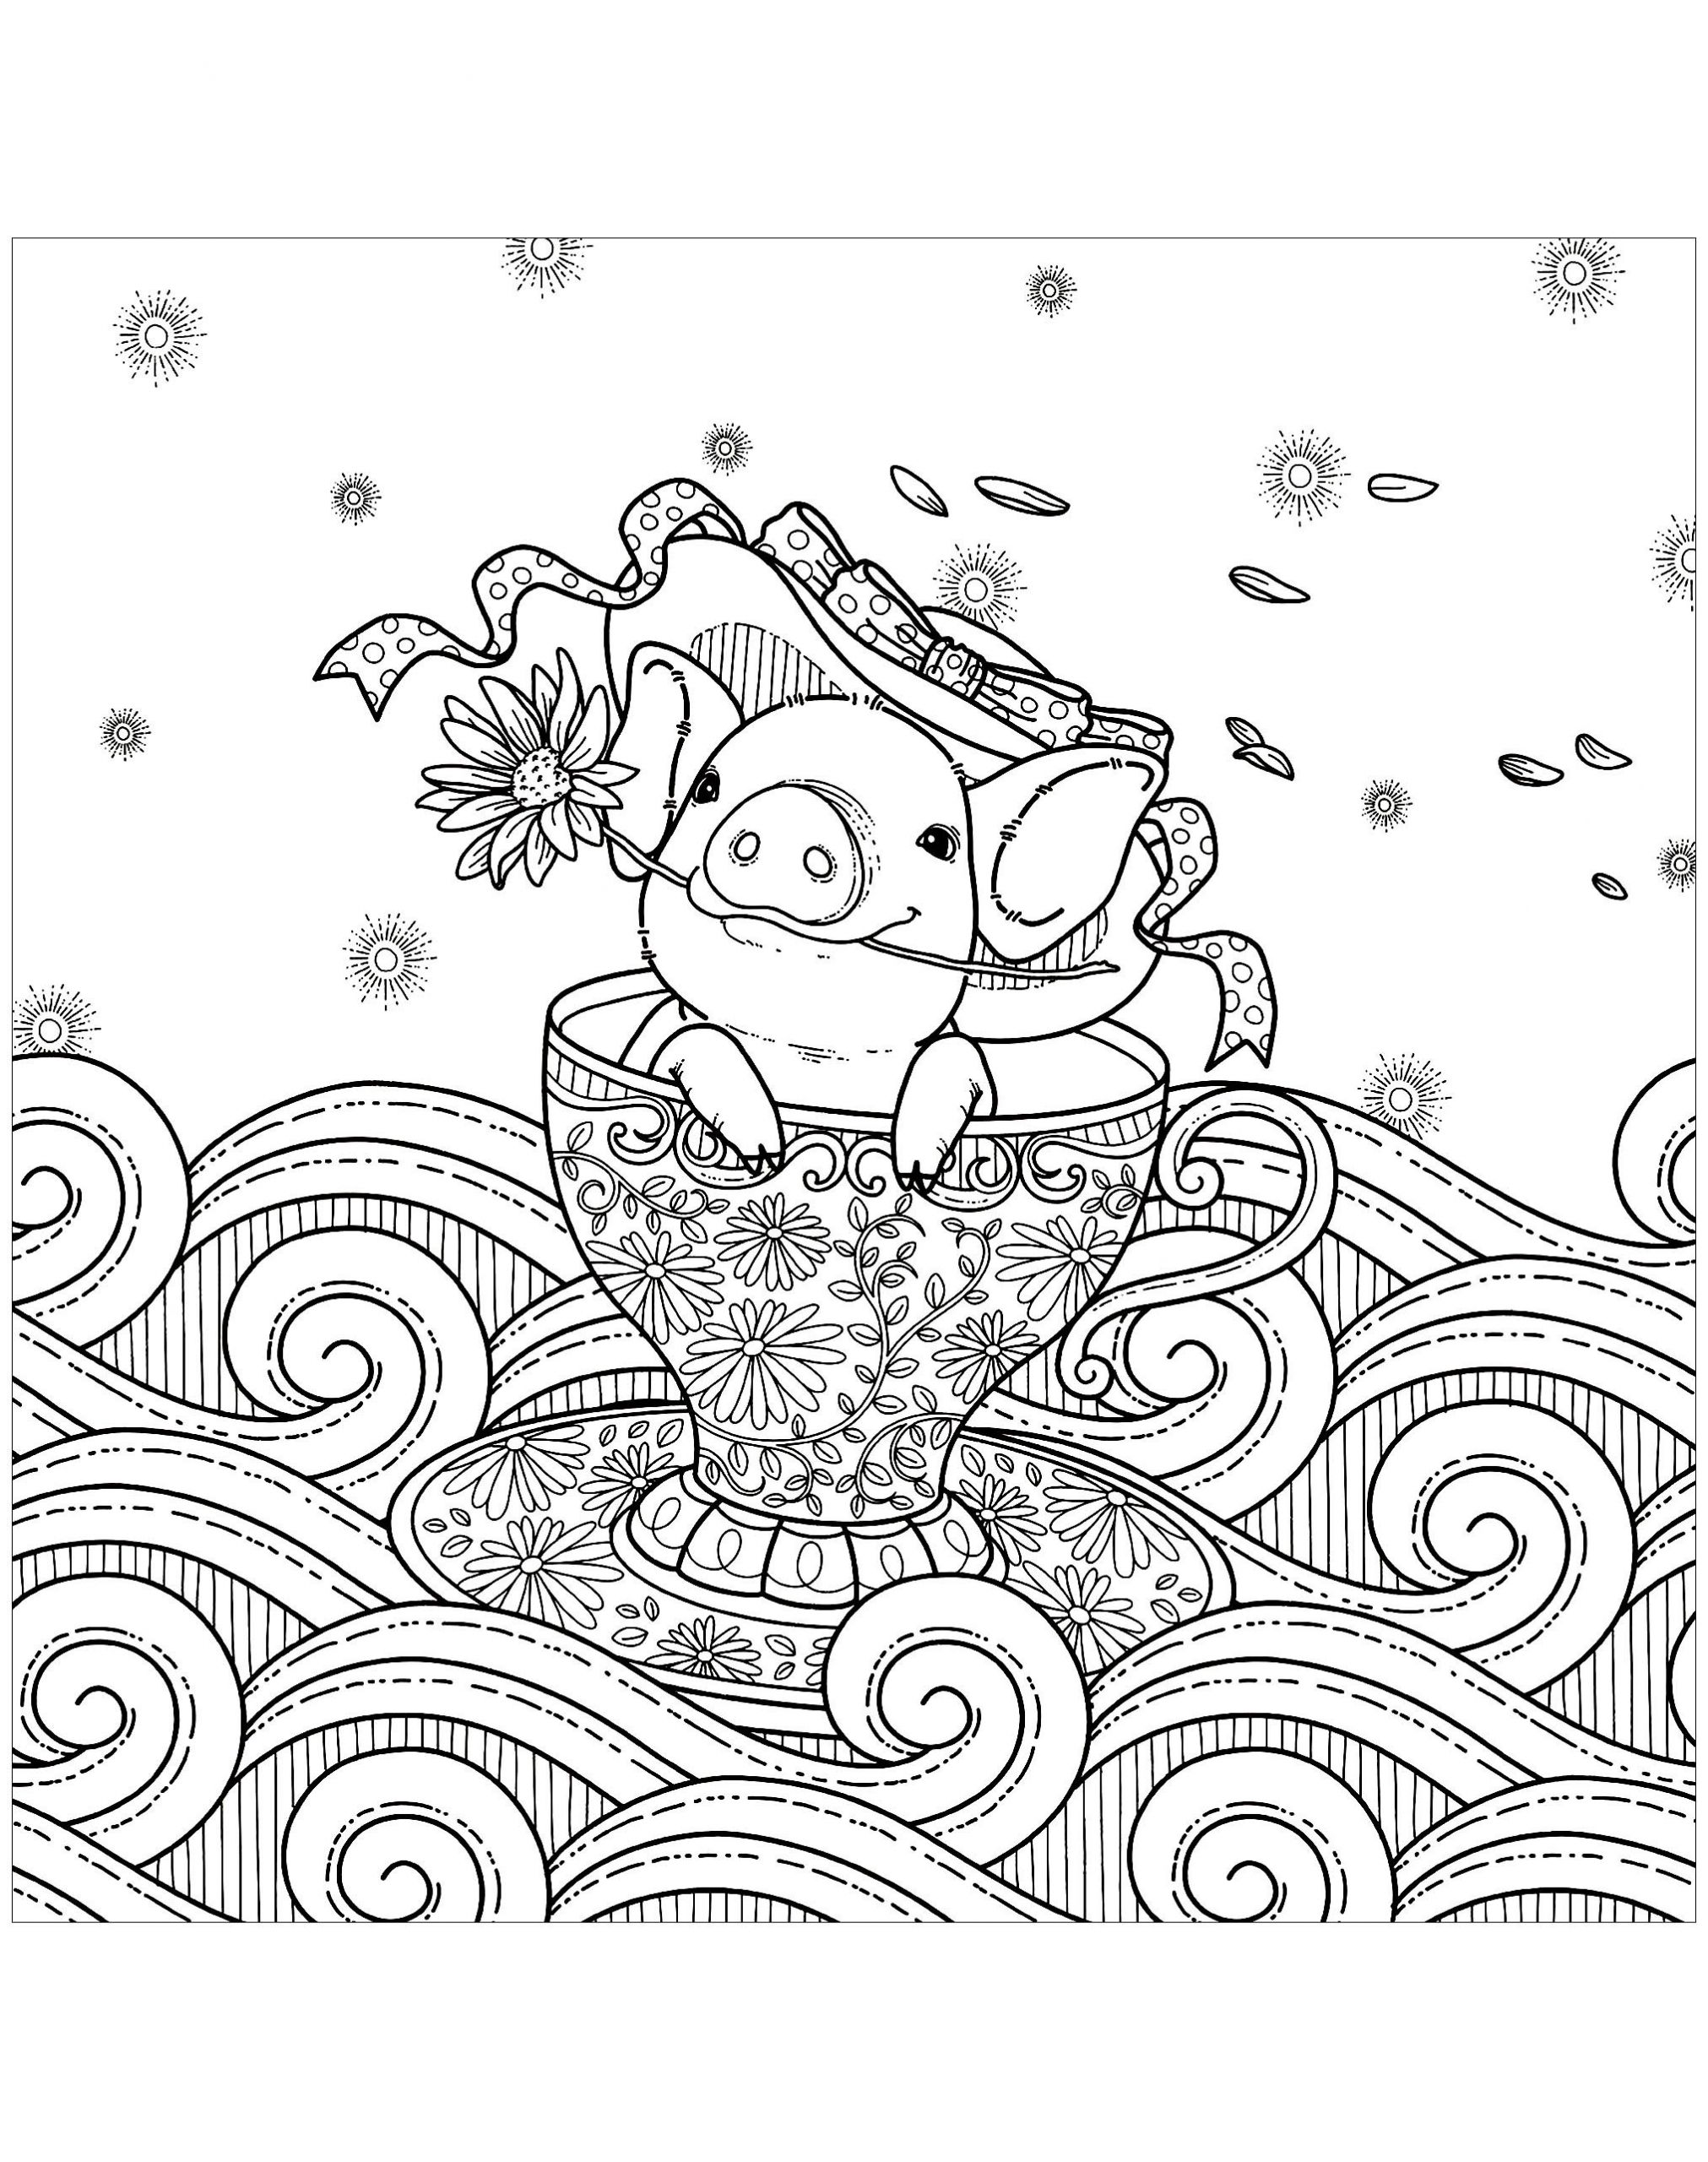 Pig Coloring Pages For Adults
 Pig in a cup Pigs Adult Coloring Pages